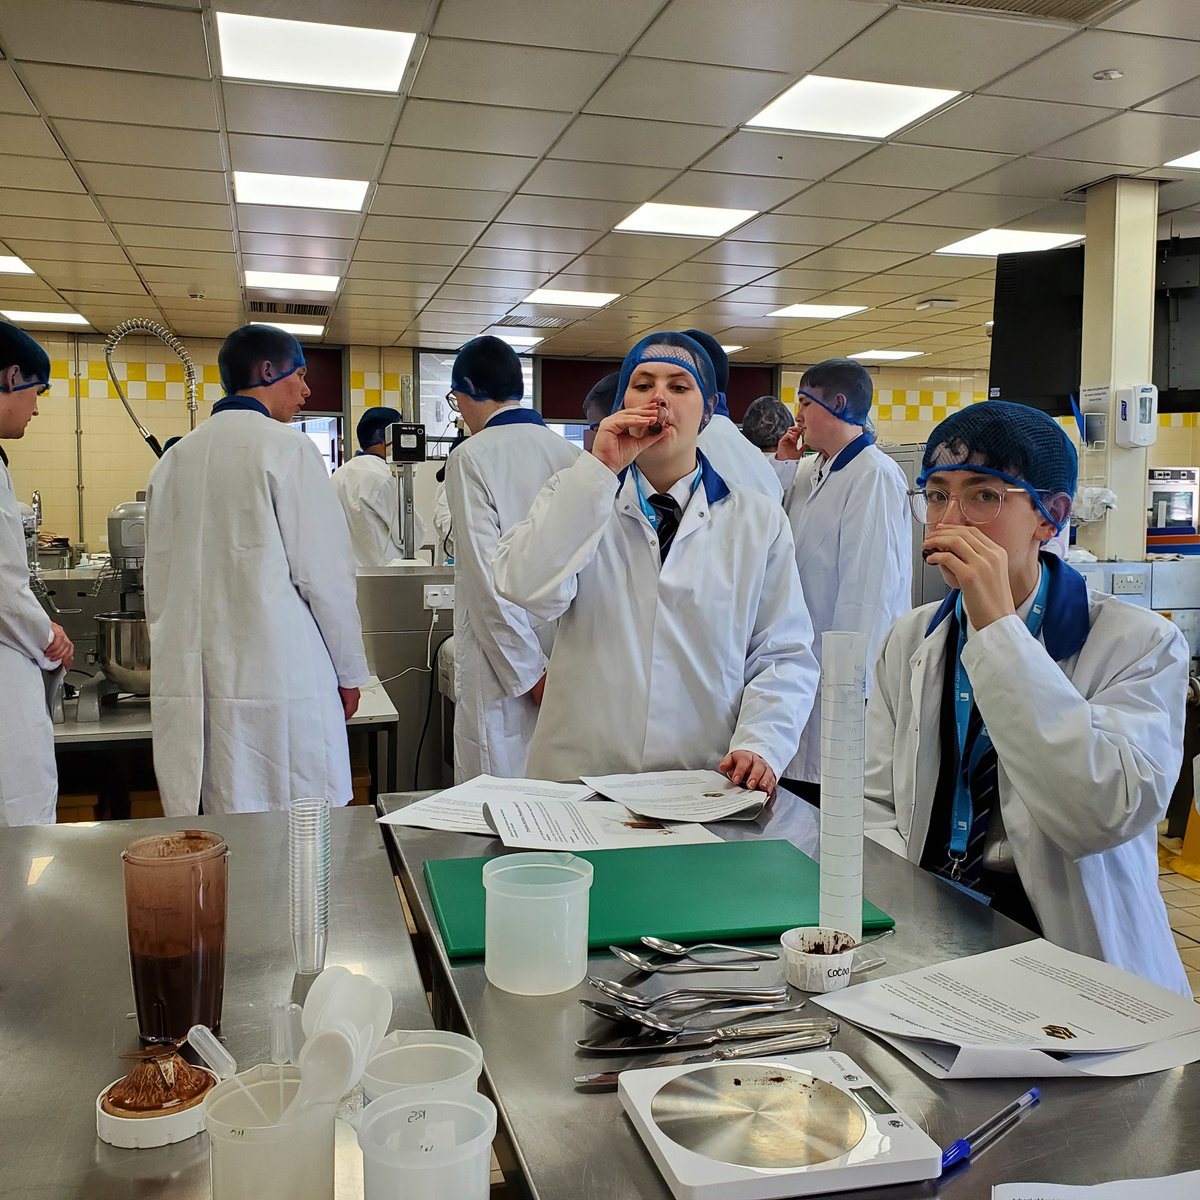 Yr10 Foodies visited Leeds Uni today for a fab Food Science taster day. They developed tasty vegan chocolate milkshakes, explored the uni campus and chatted to  the under grads 🤩 #STEMeducation #gcsefood #careersinfood @DeltaGarforth @GApost16 @FoodSciLeeds